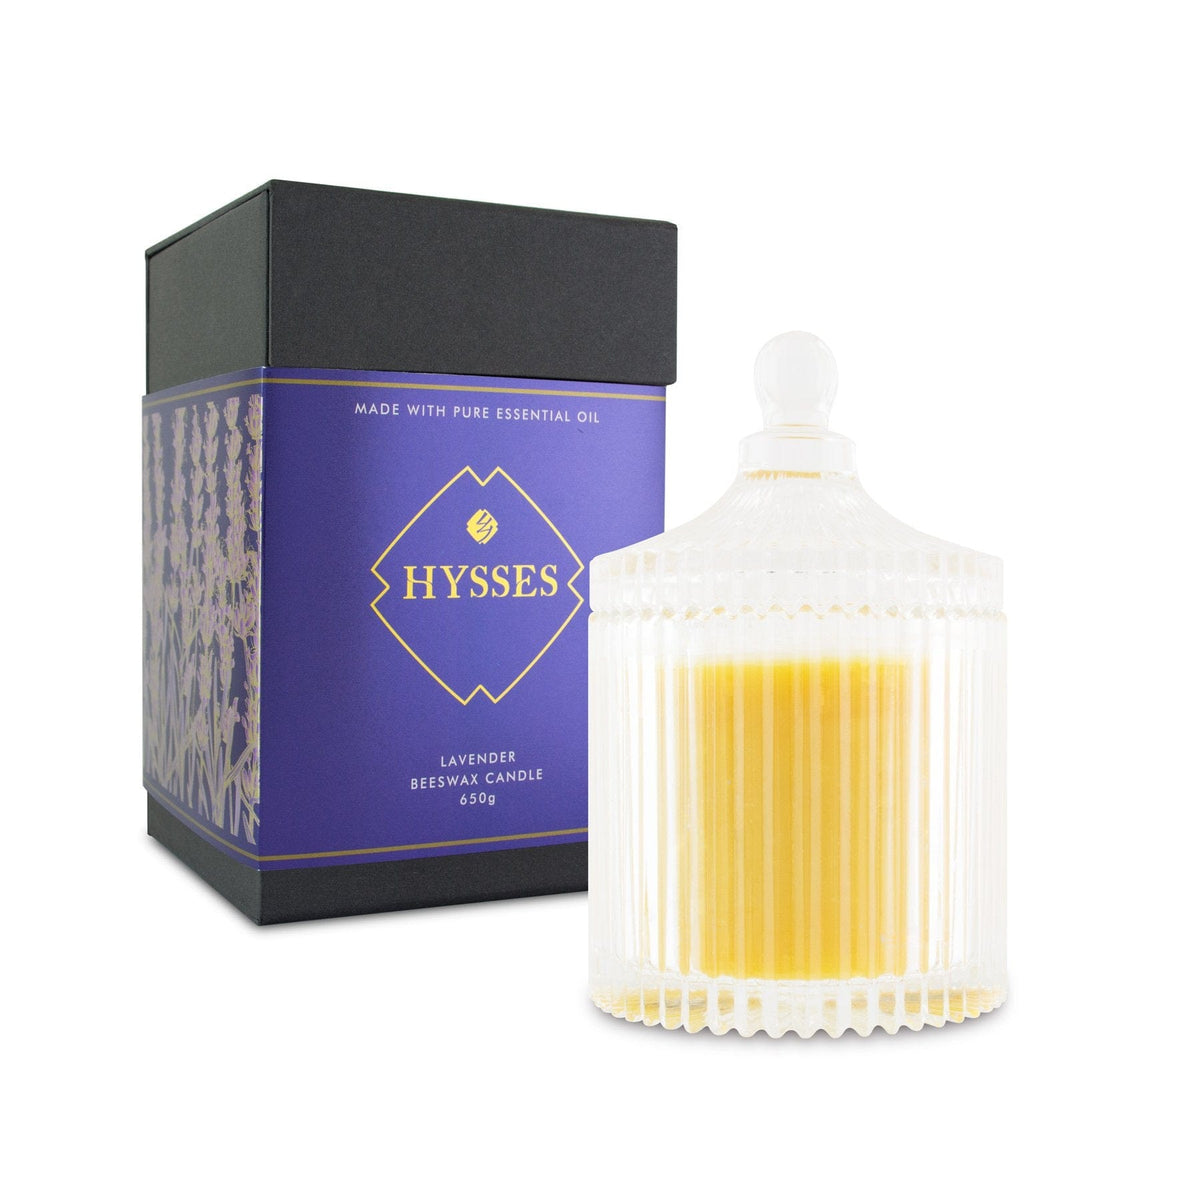 Hysses Home Scents 650g Beeswax Candle Lavender